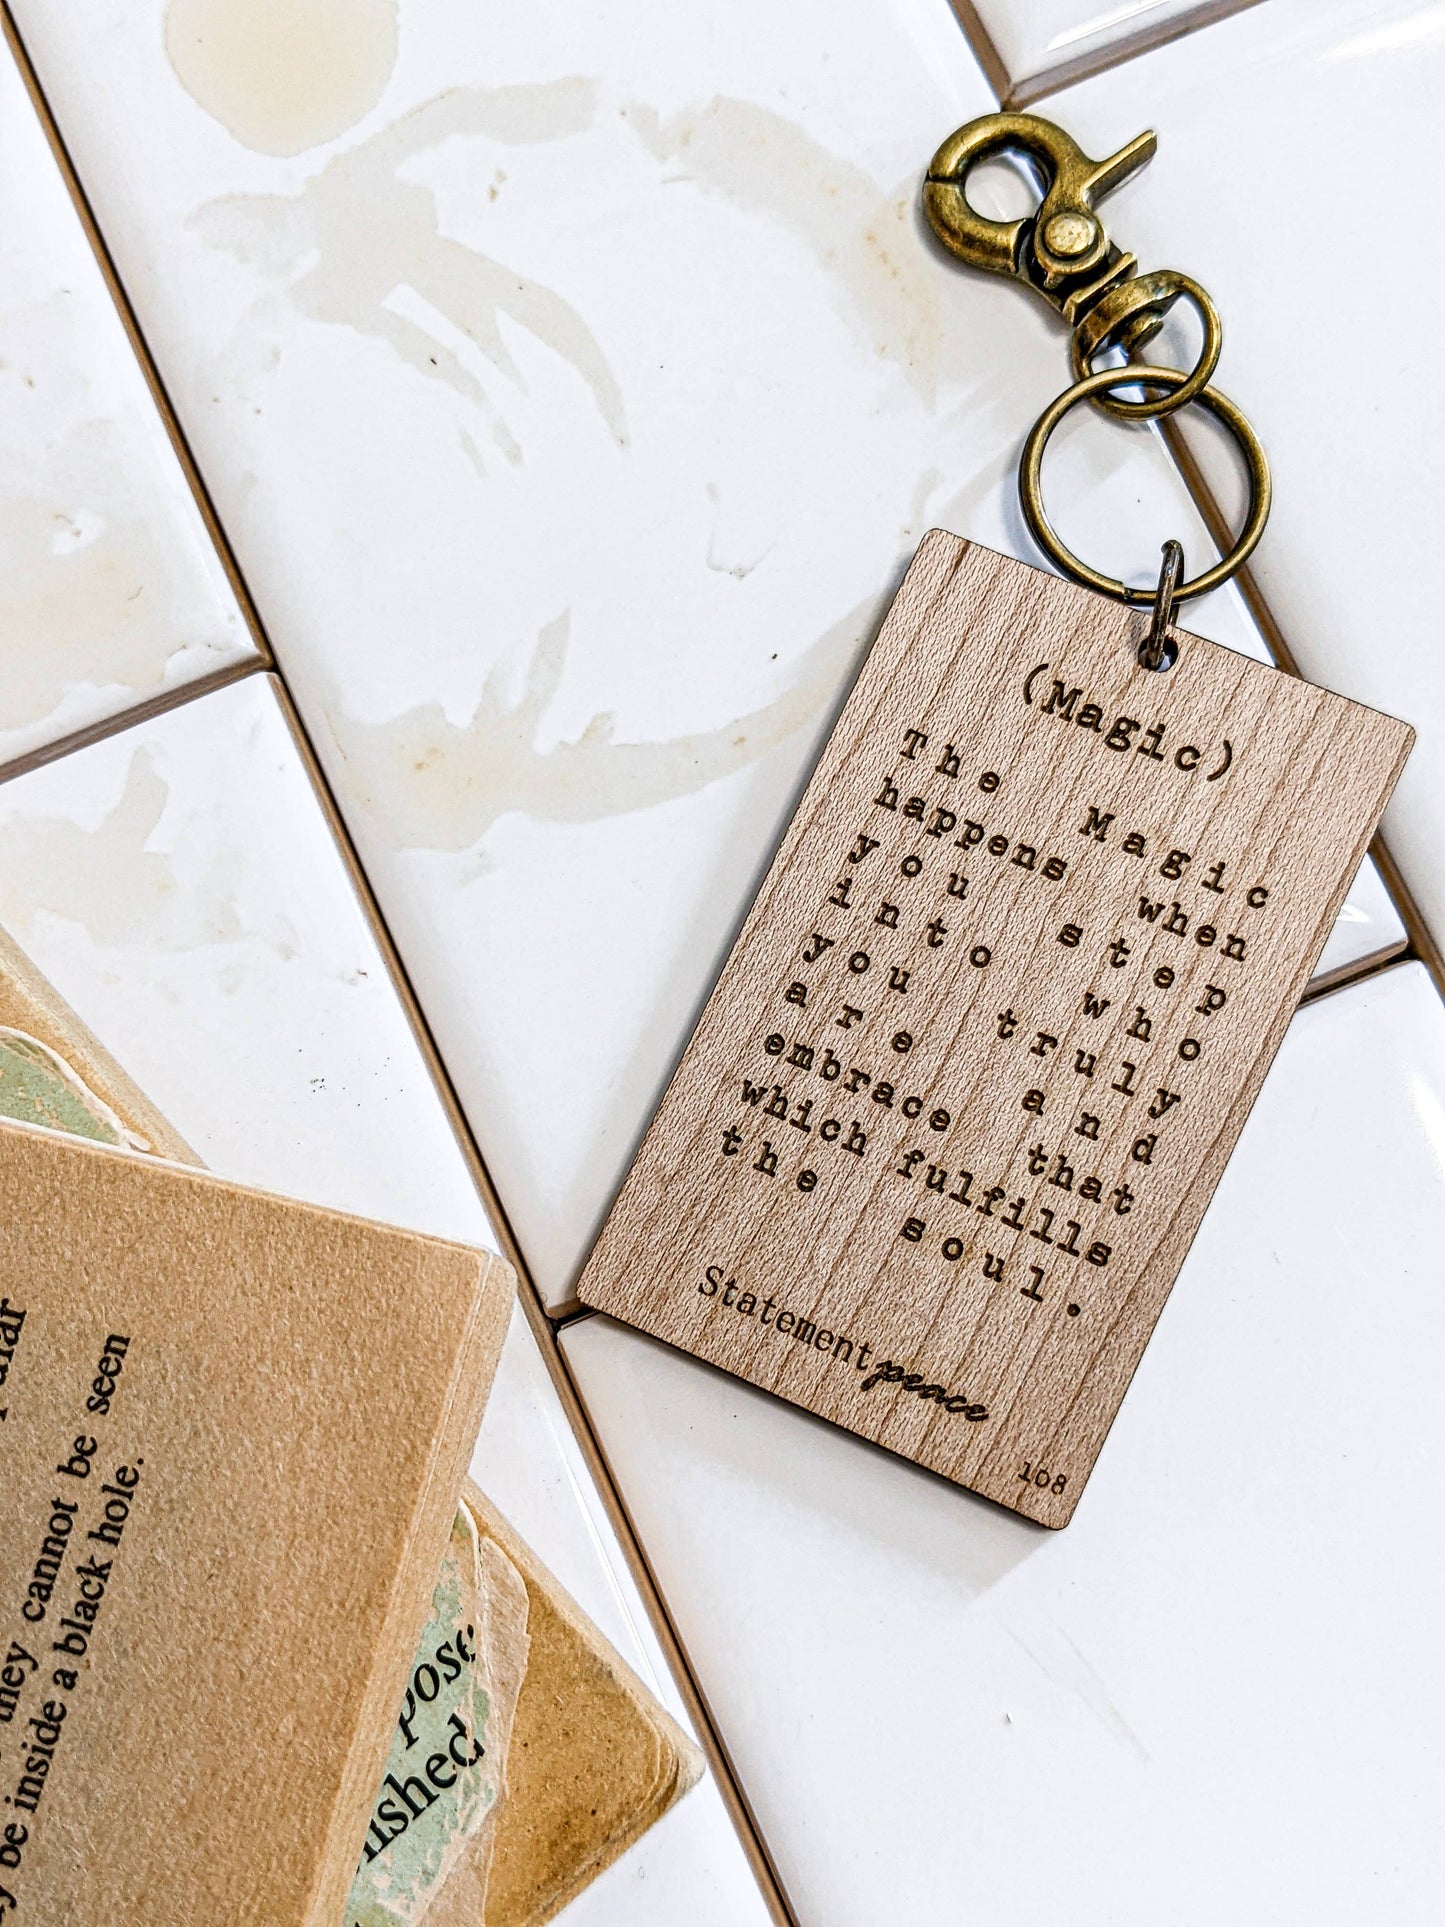 Wooden Key Chain WIth Spiritual Saying